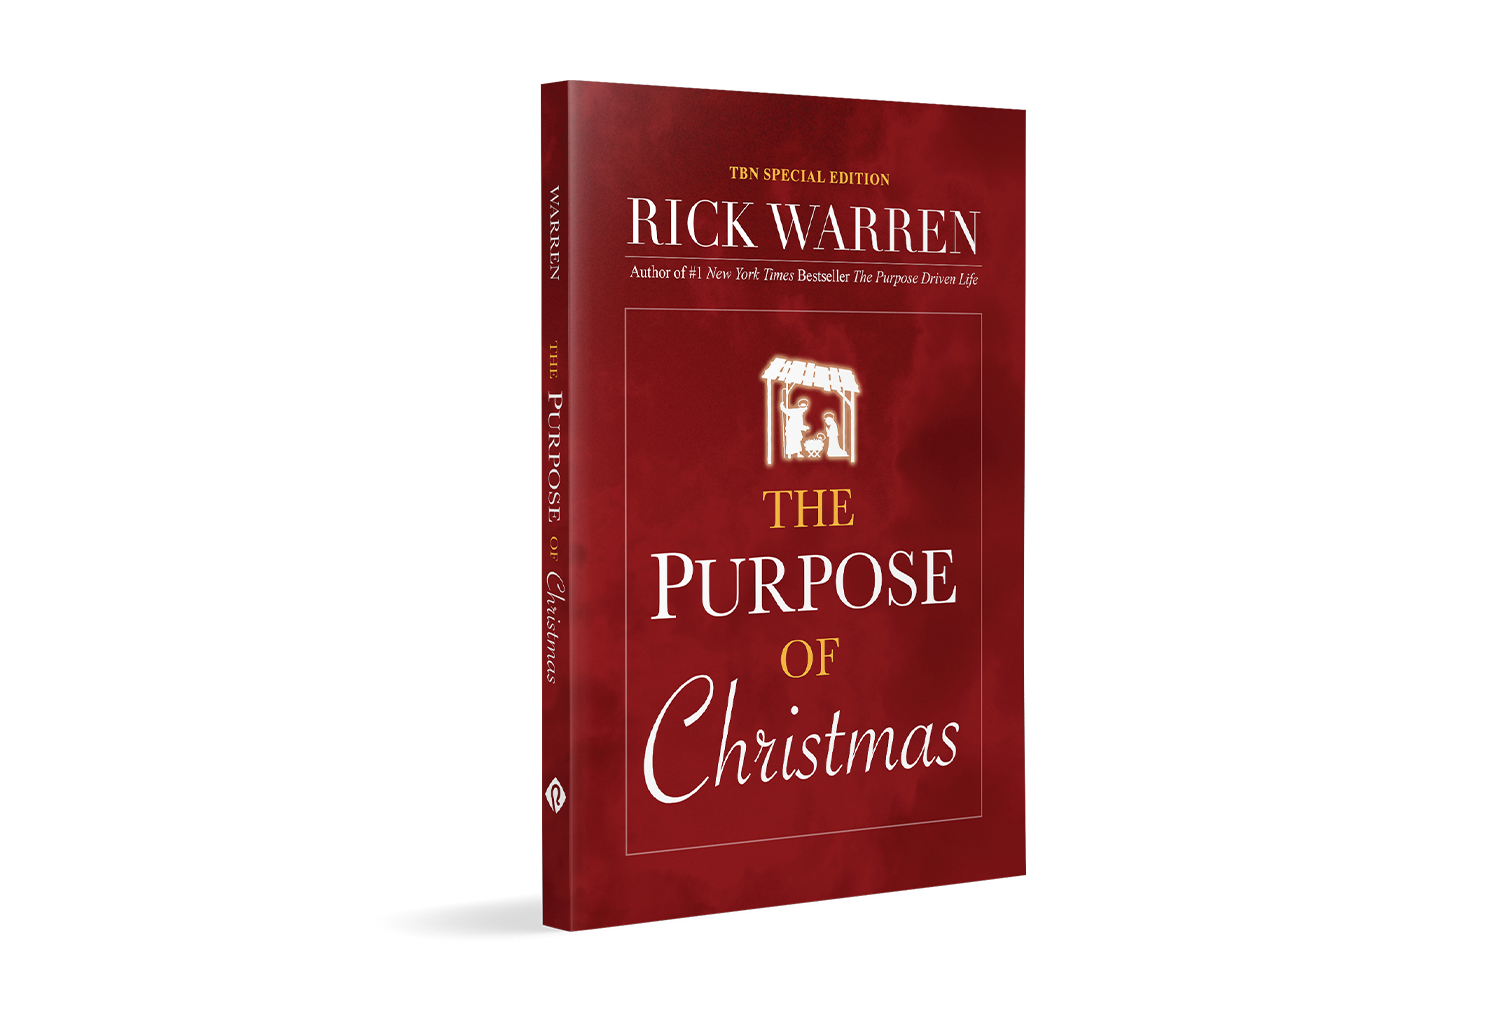 Purpose of Christmas by Rick Warren by TBN